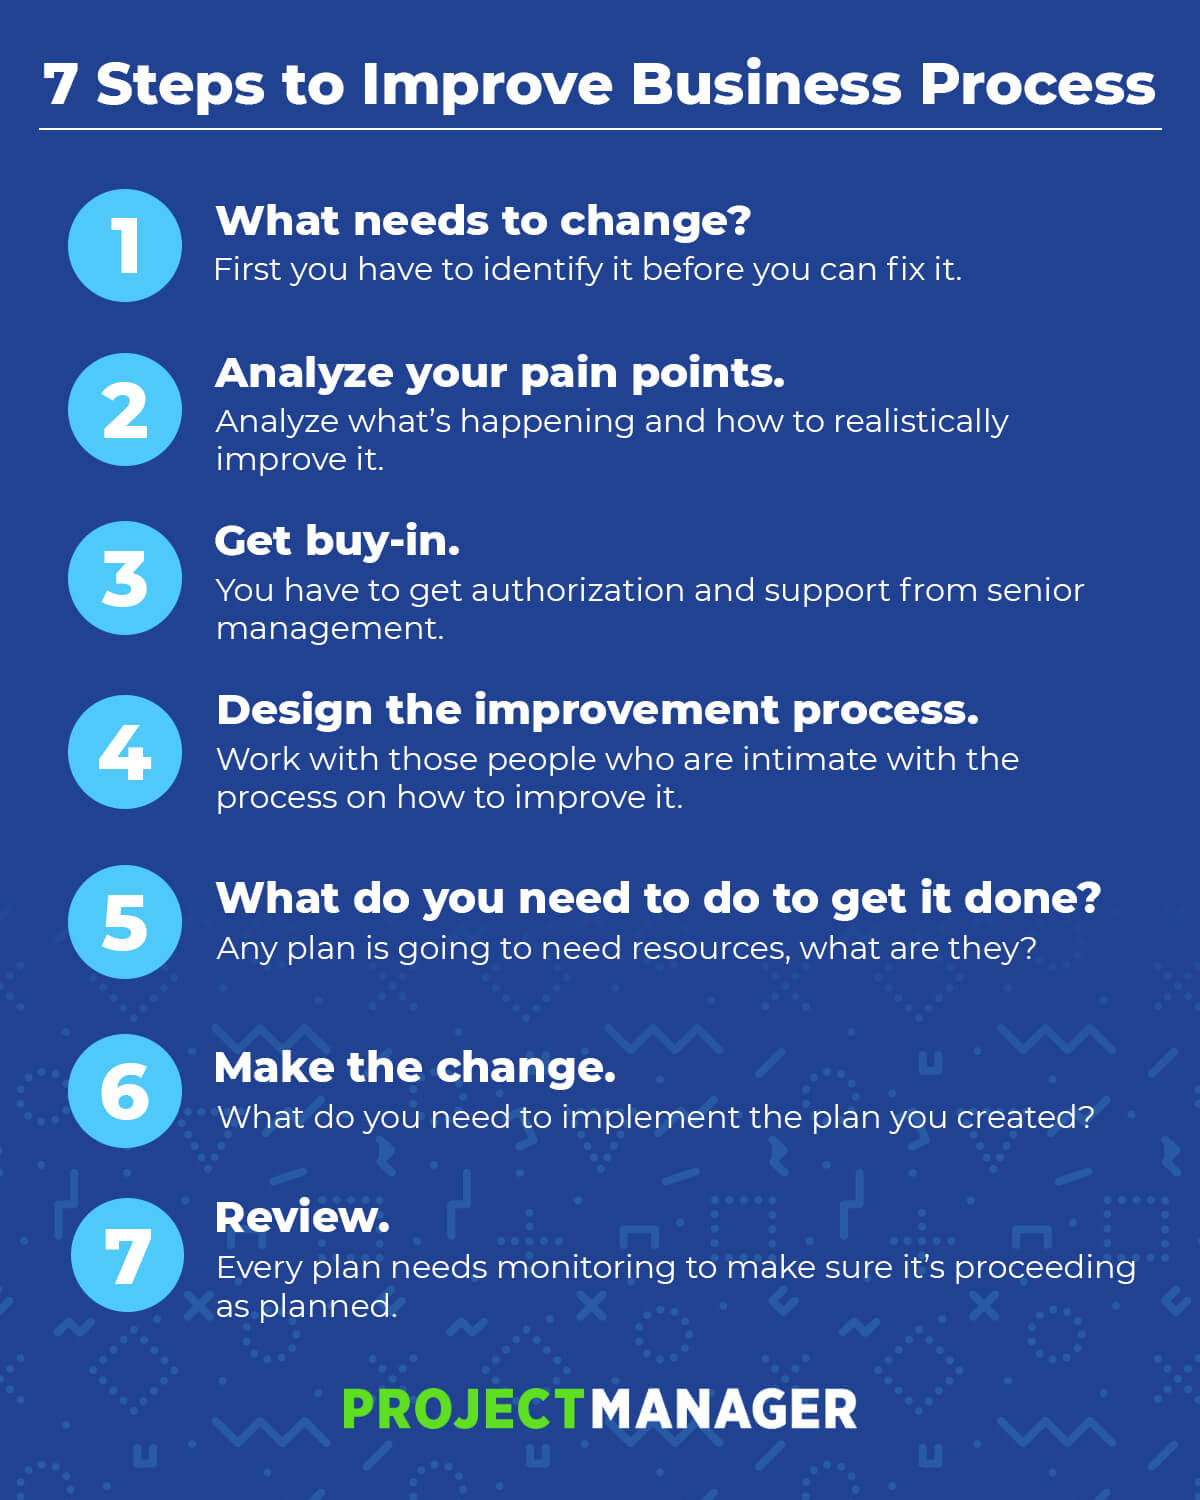 How To Implement Business Process Improvement For Business Process Improvement Plan Template